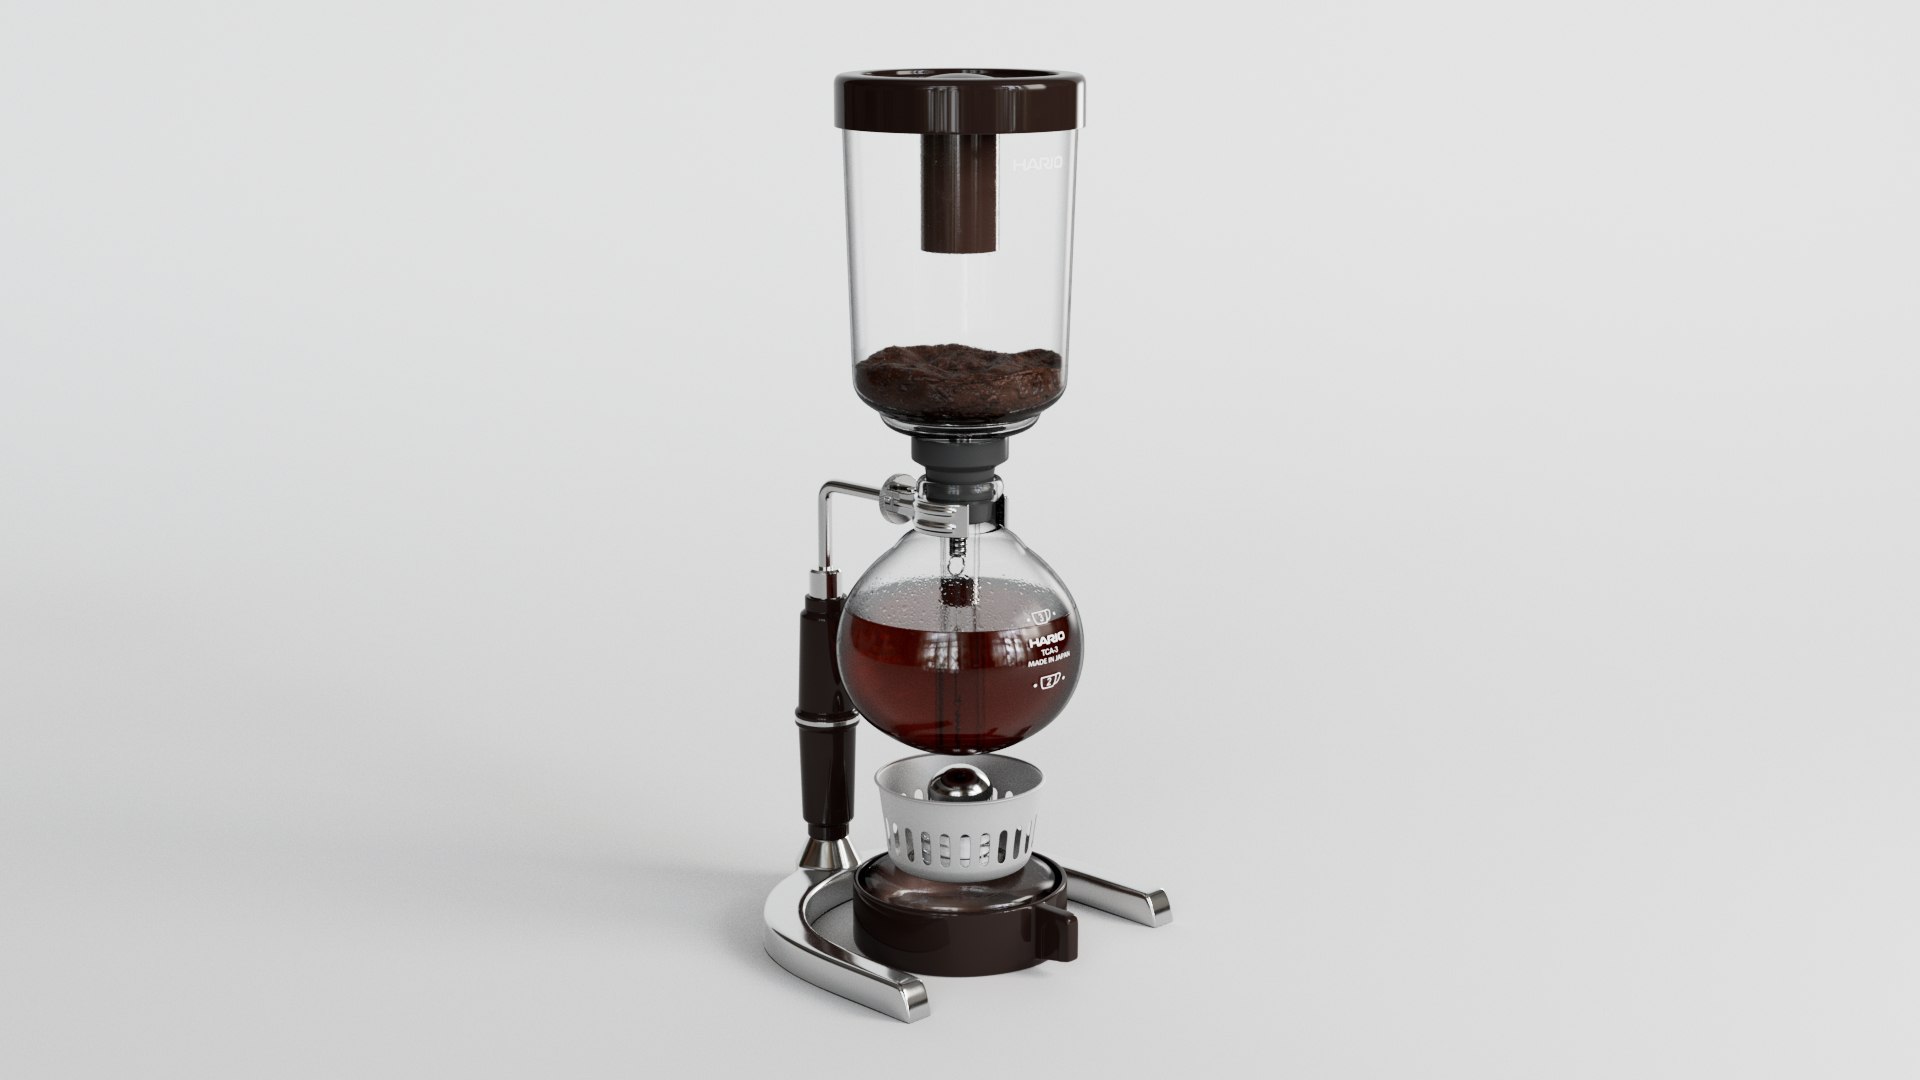 modern siphon coffee maker and metallic drip cattle for espresso